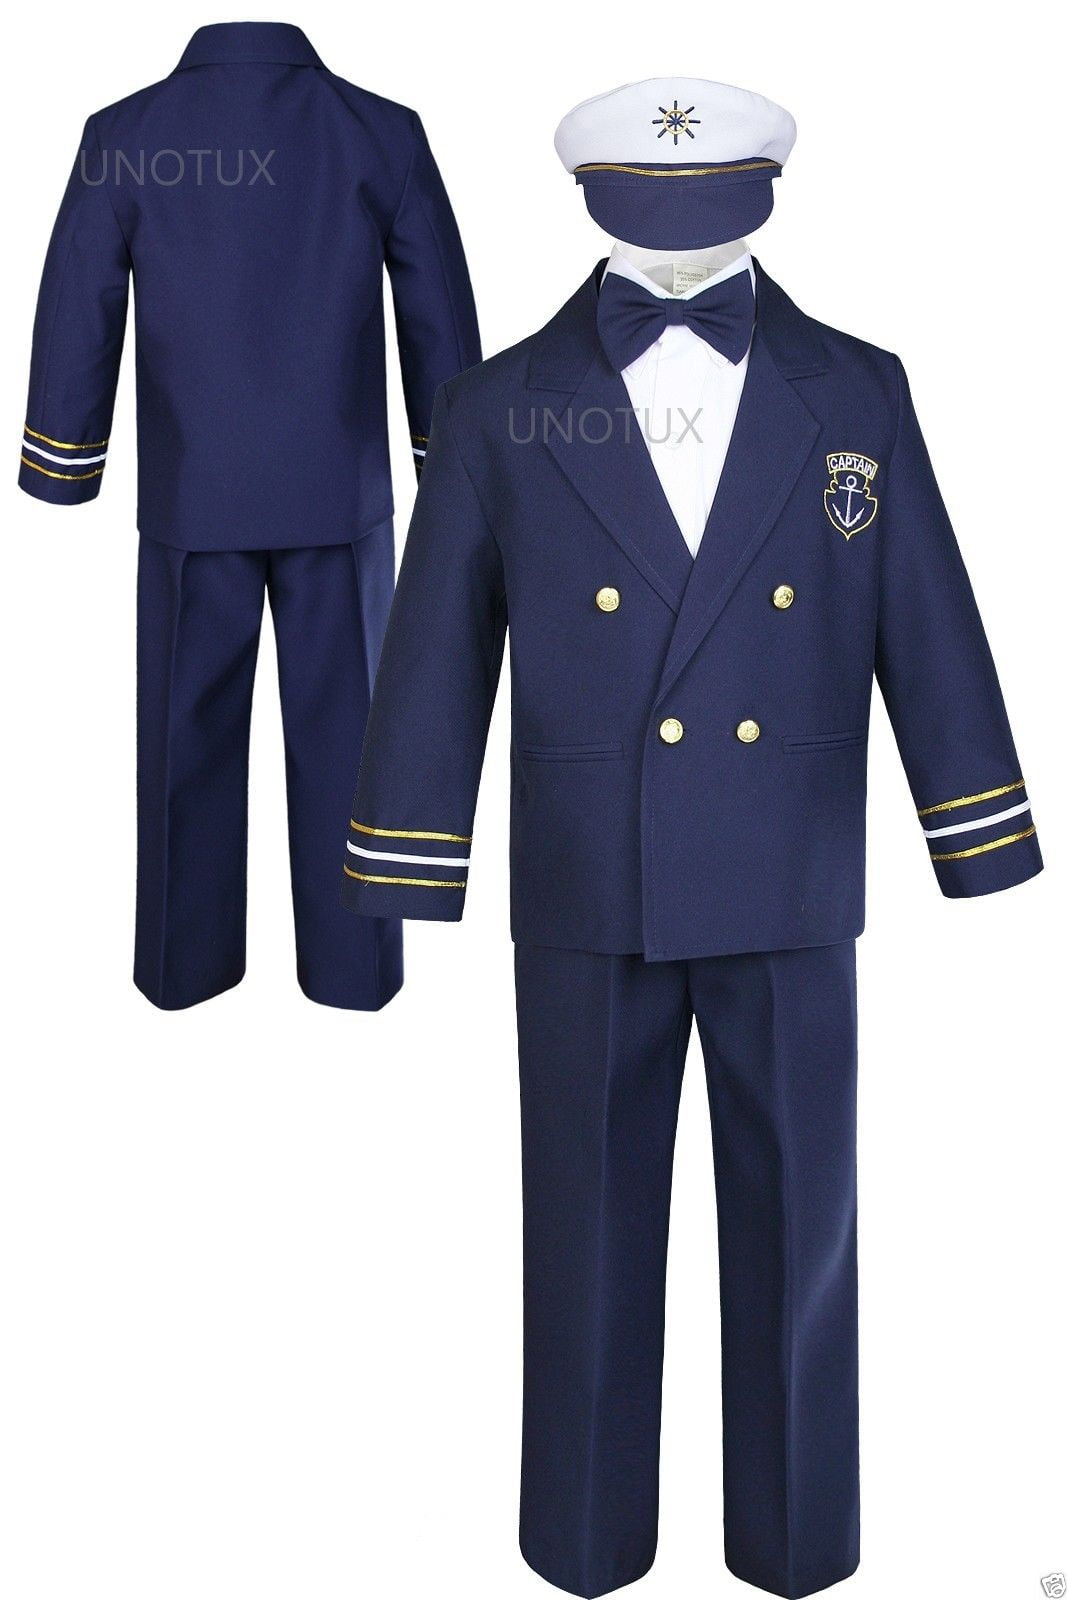 New Infant Baby Toddler Navy/white Sailor Formal Suit hat Outfits New Born-3T 